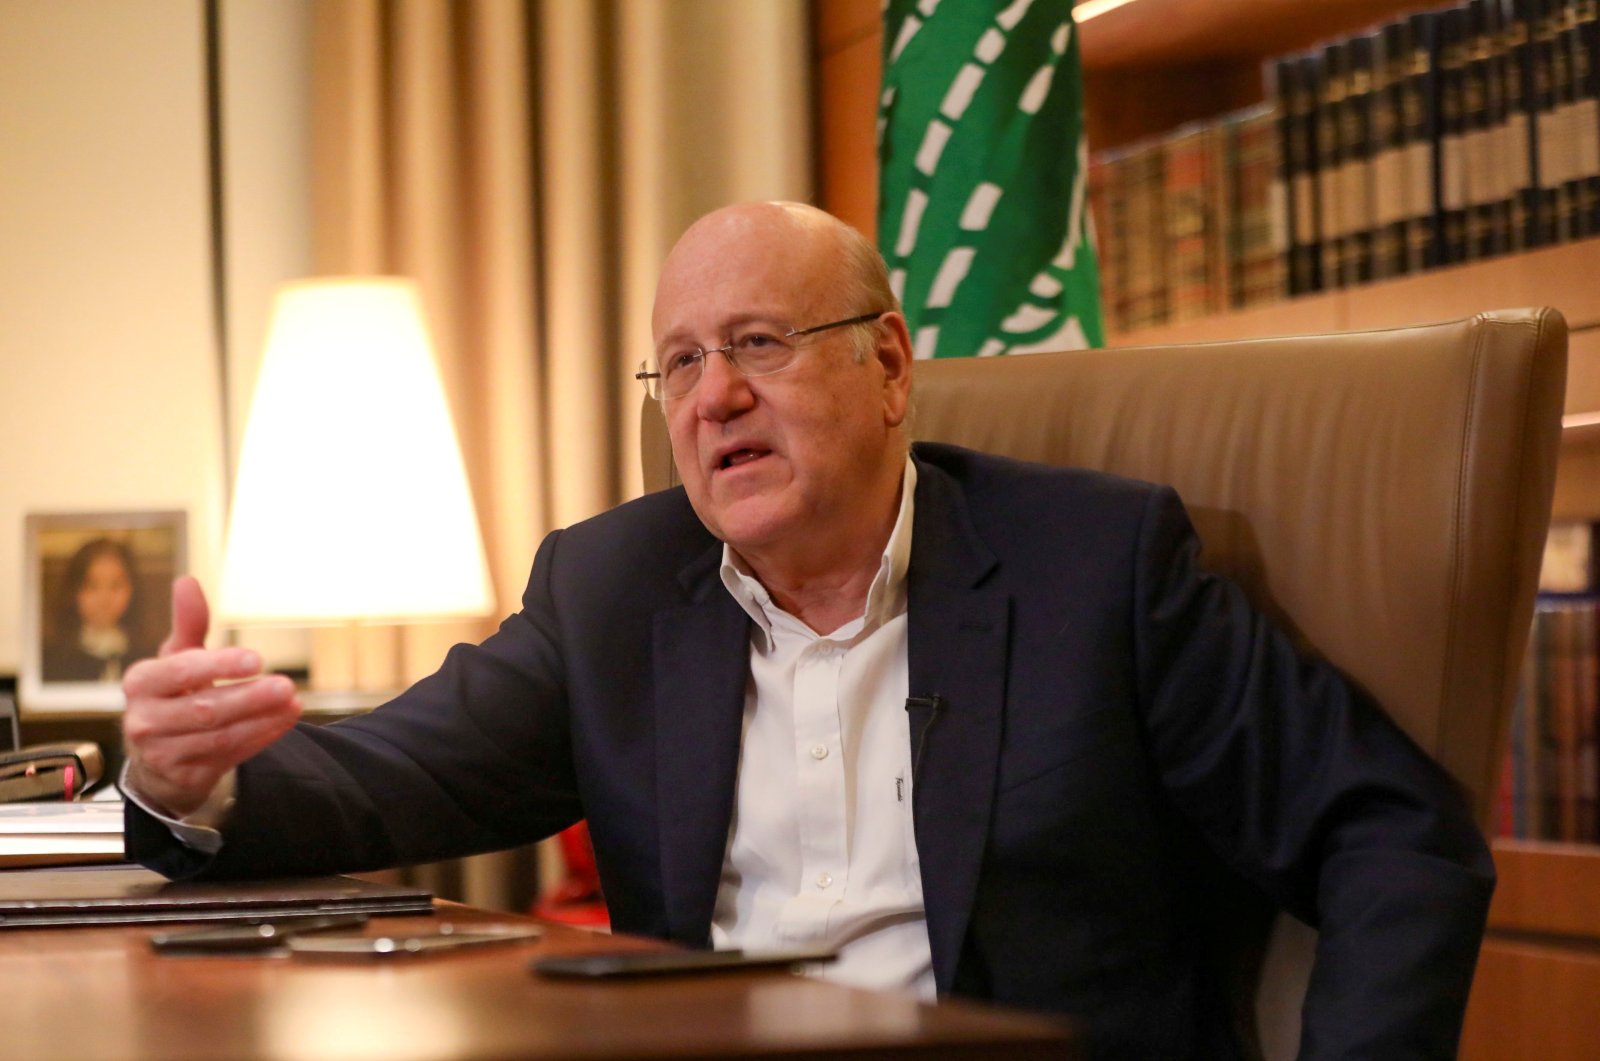 Lebanese Prime Minister Najib Mikati speaks during an interview with Reuters at the government palace in Beirut, Lebanon, Oct. 14, 2021. (Reuters Photo)